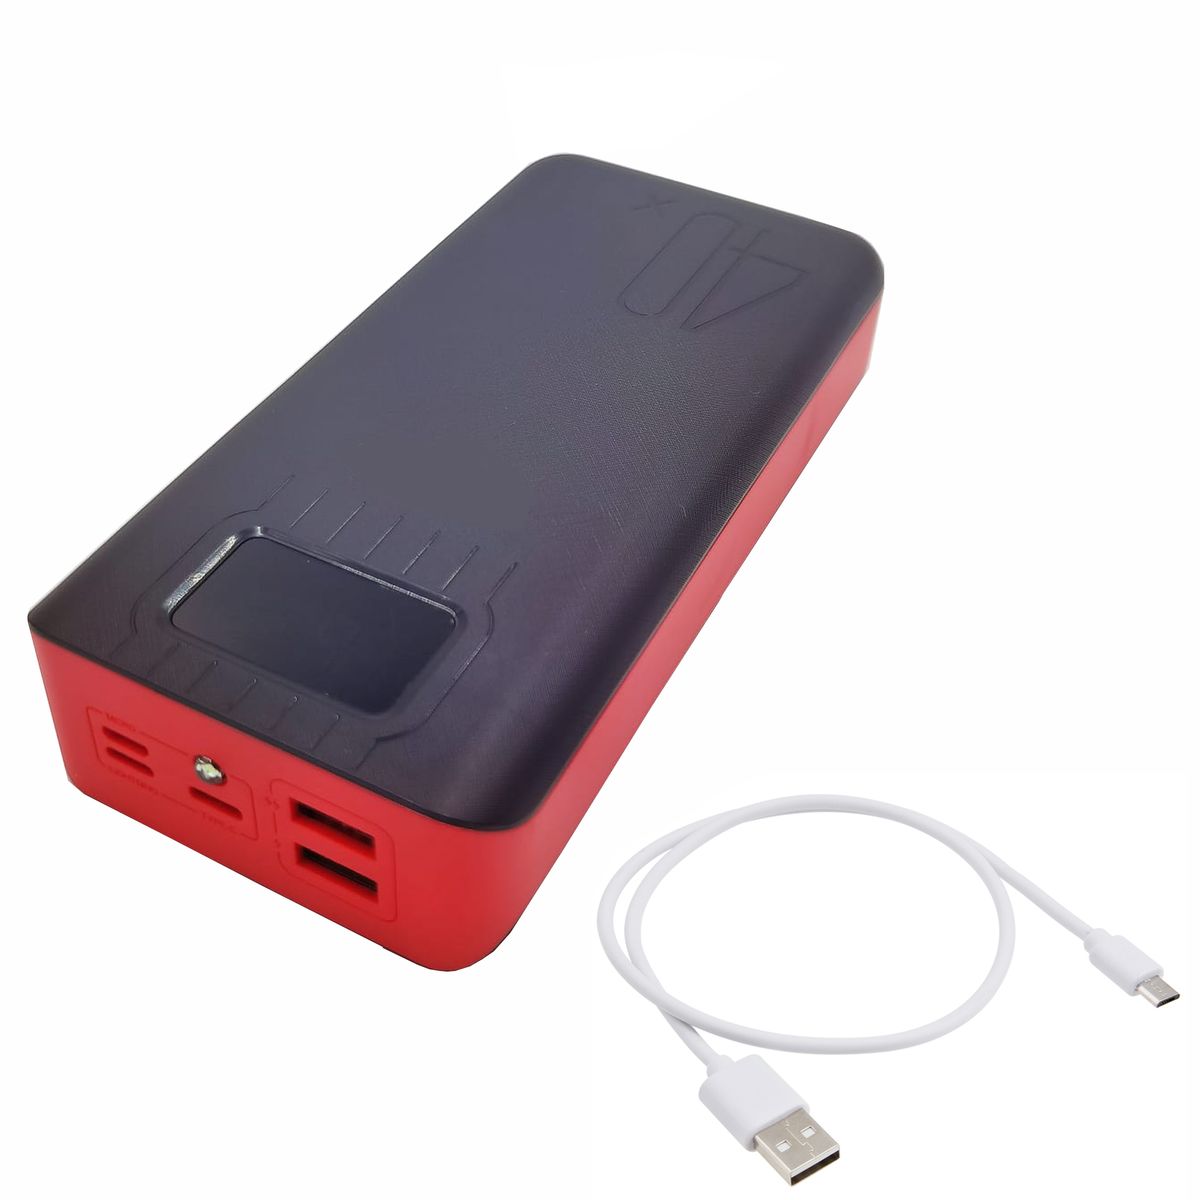 New Age 50000mAh PD Power Bank - 1 Charge = 3 Weeks of Power